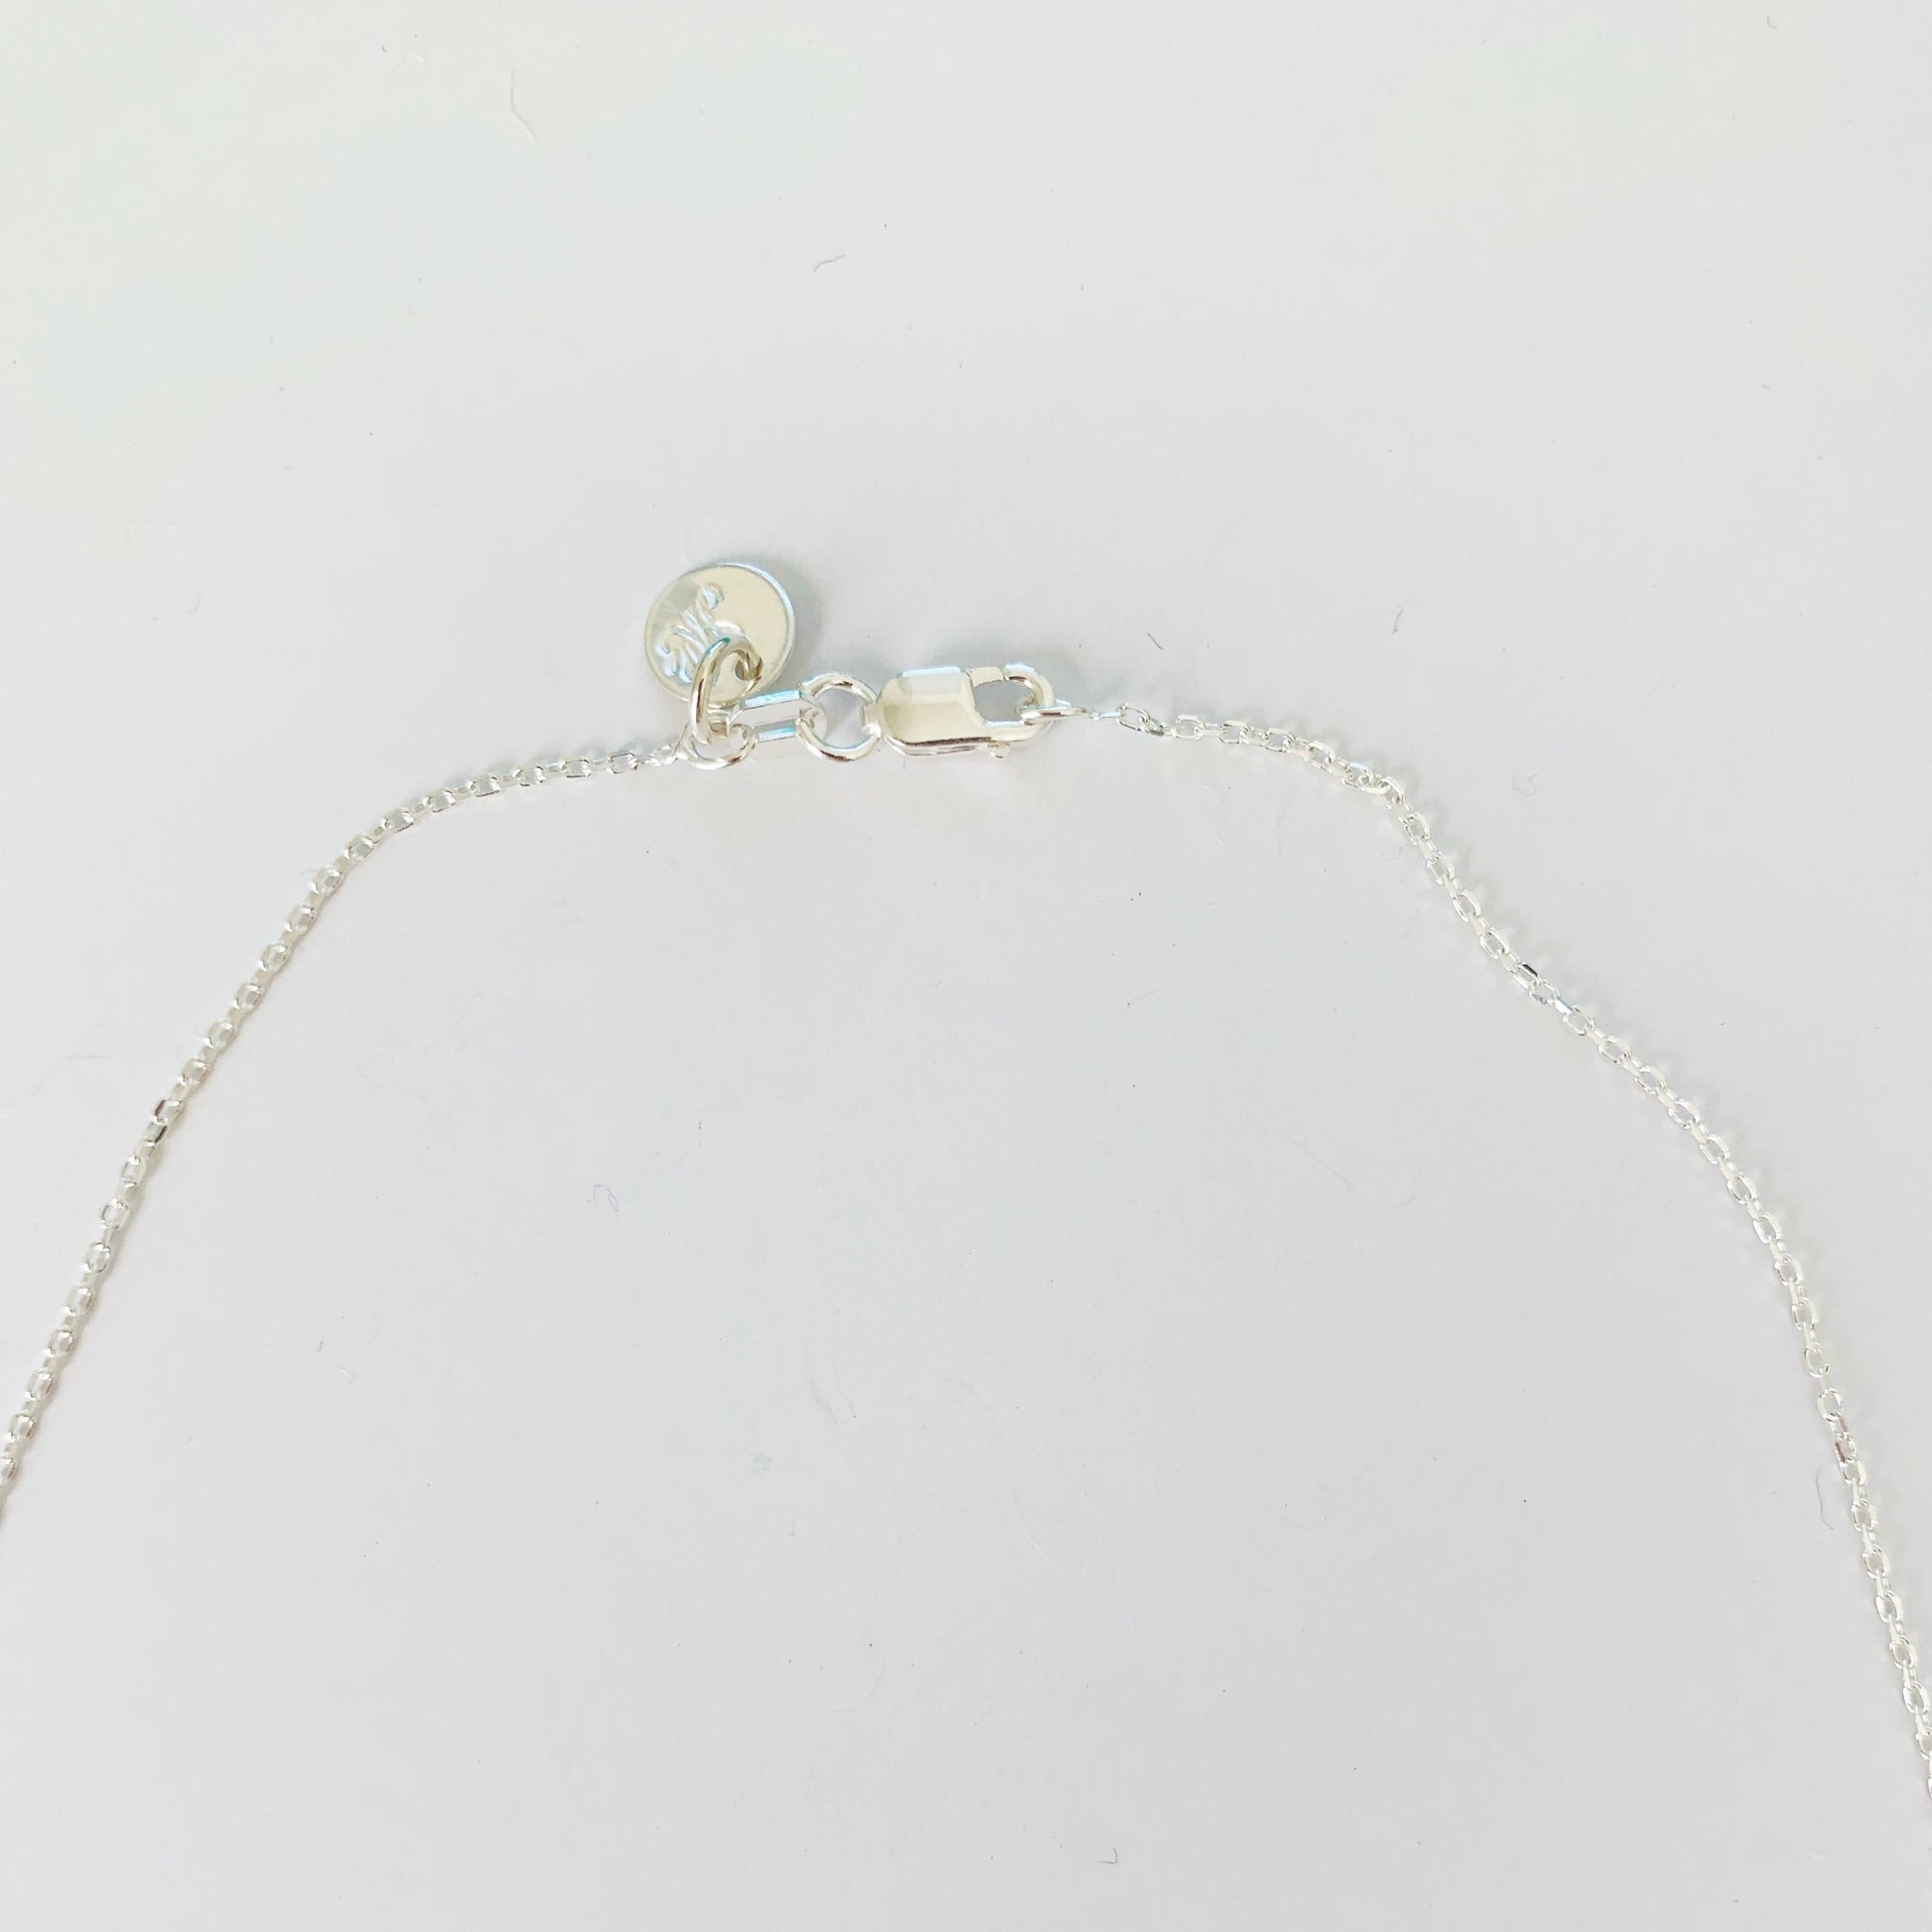 the back of the raindrop necklace is clasped with a lobster claw shown here 